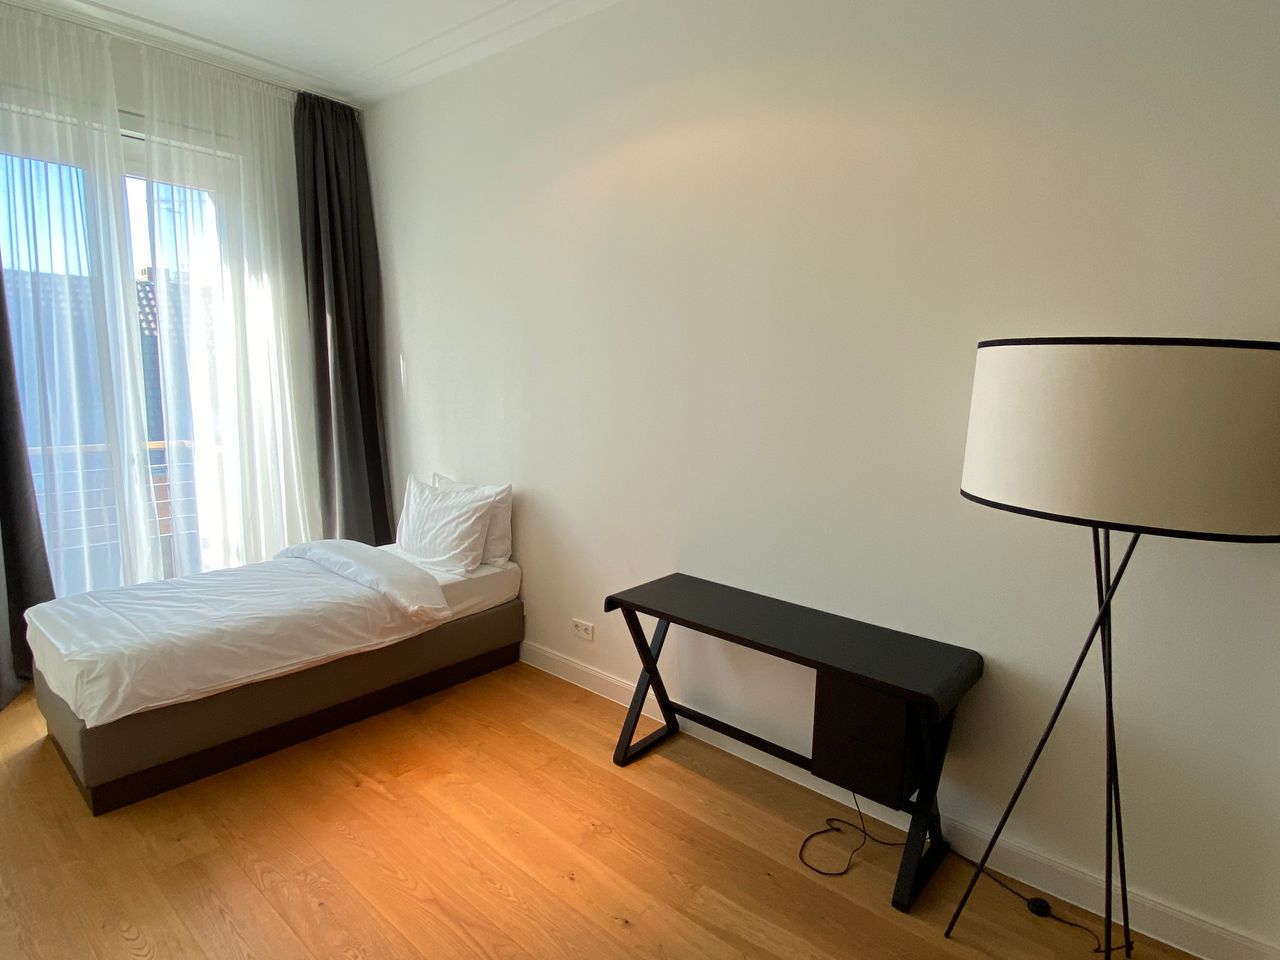 First-class two-room apartment, with luxury feeling due to high-quality equipment and the best location in Düsseldorf